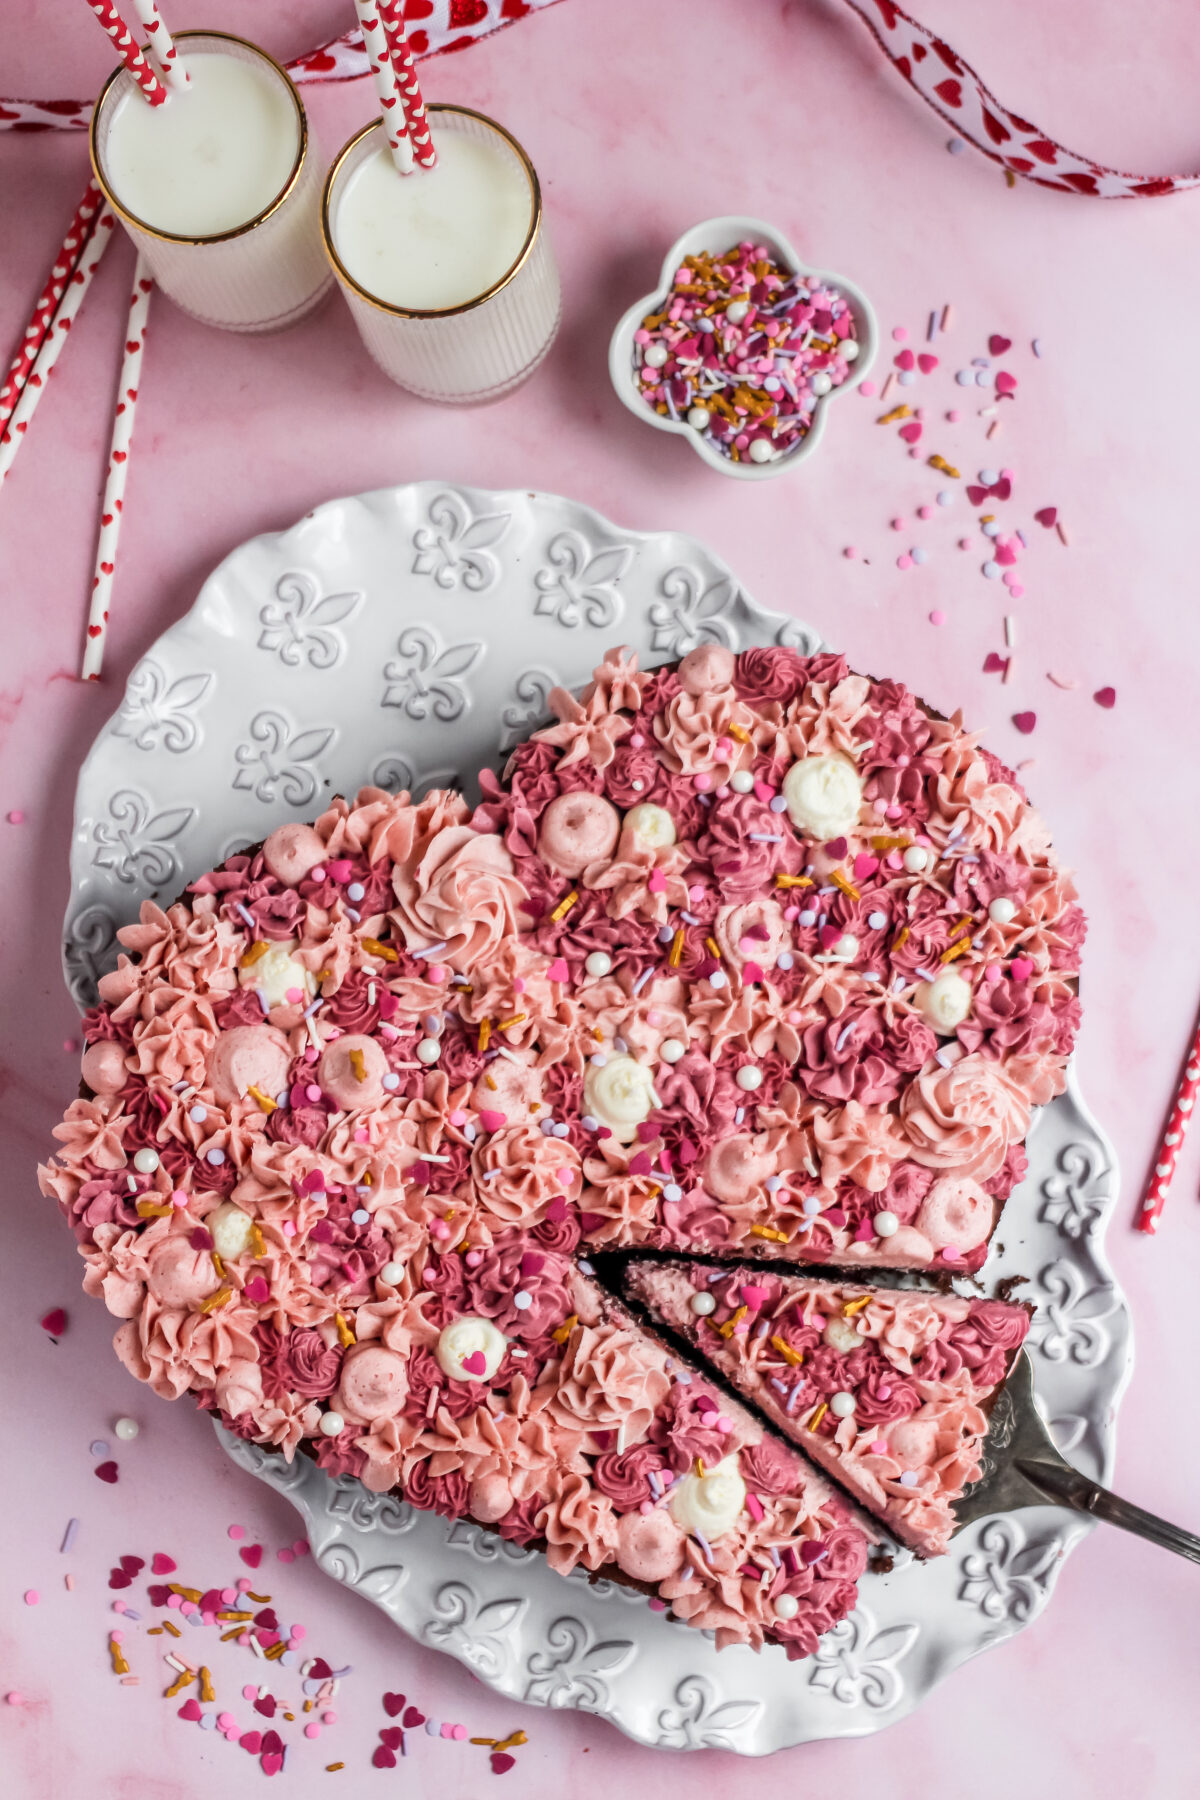 This Valentine's Day, impress your loved ones with this delicious and easy-to-follow Heart-Shaped Chocolate Strawberry Cake recipe!